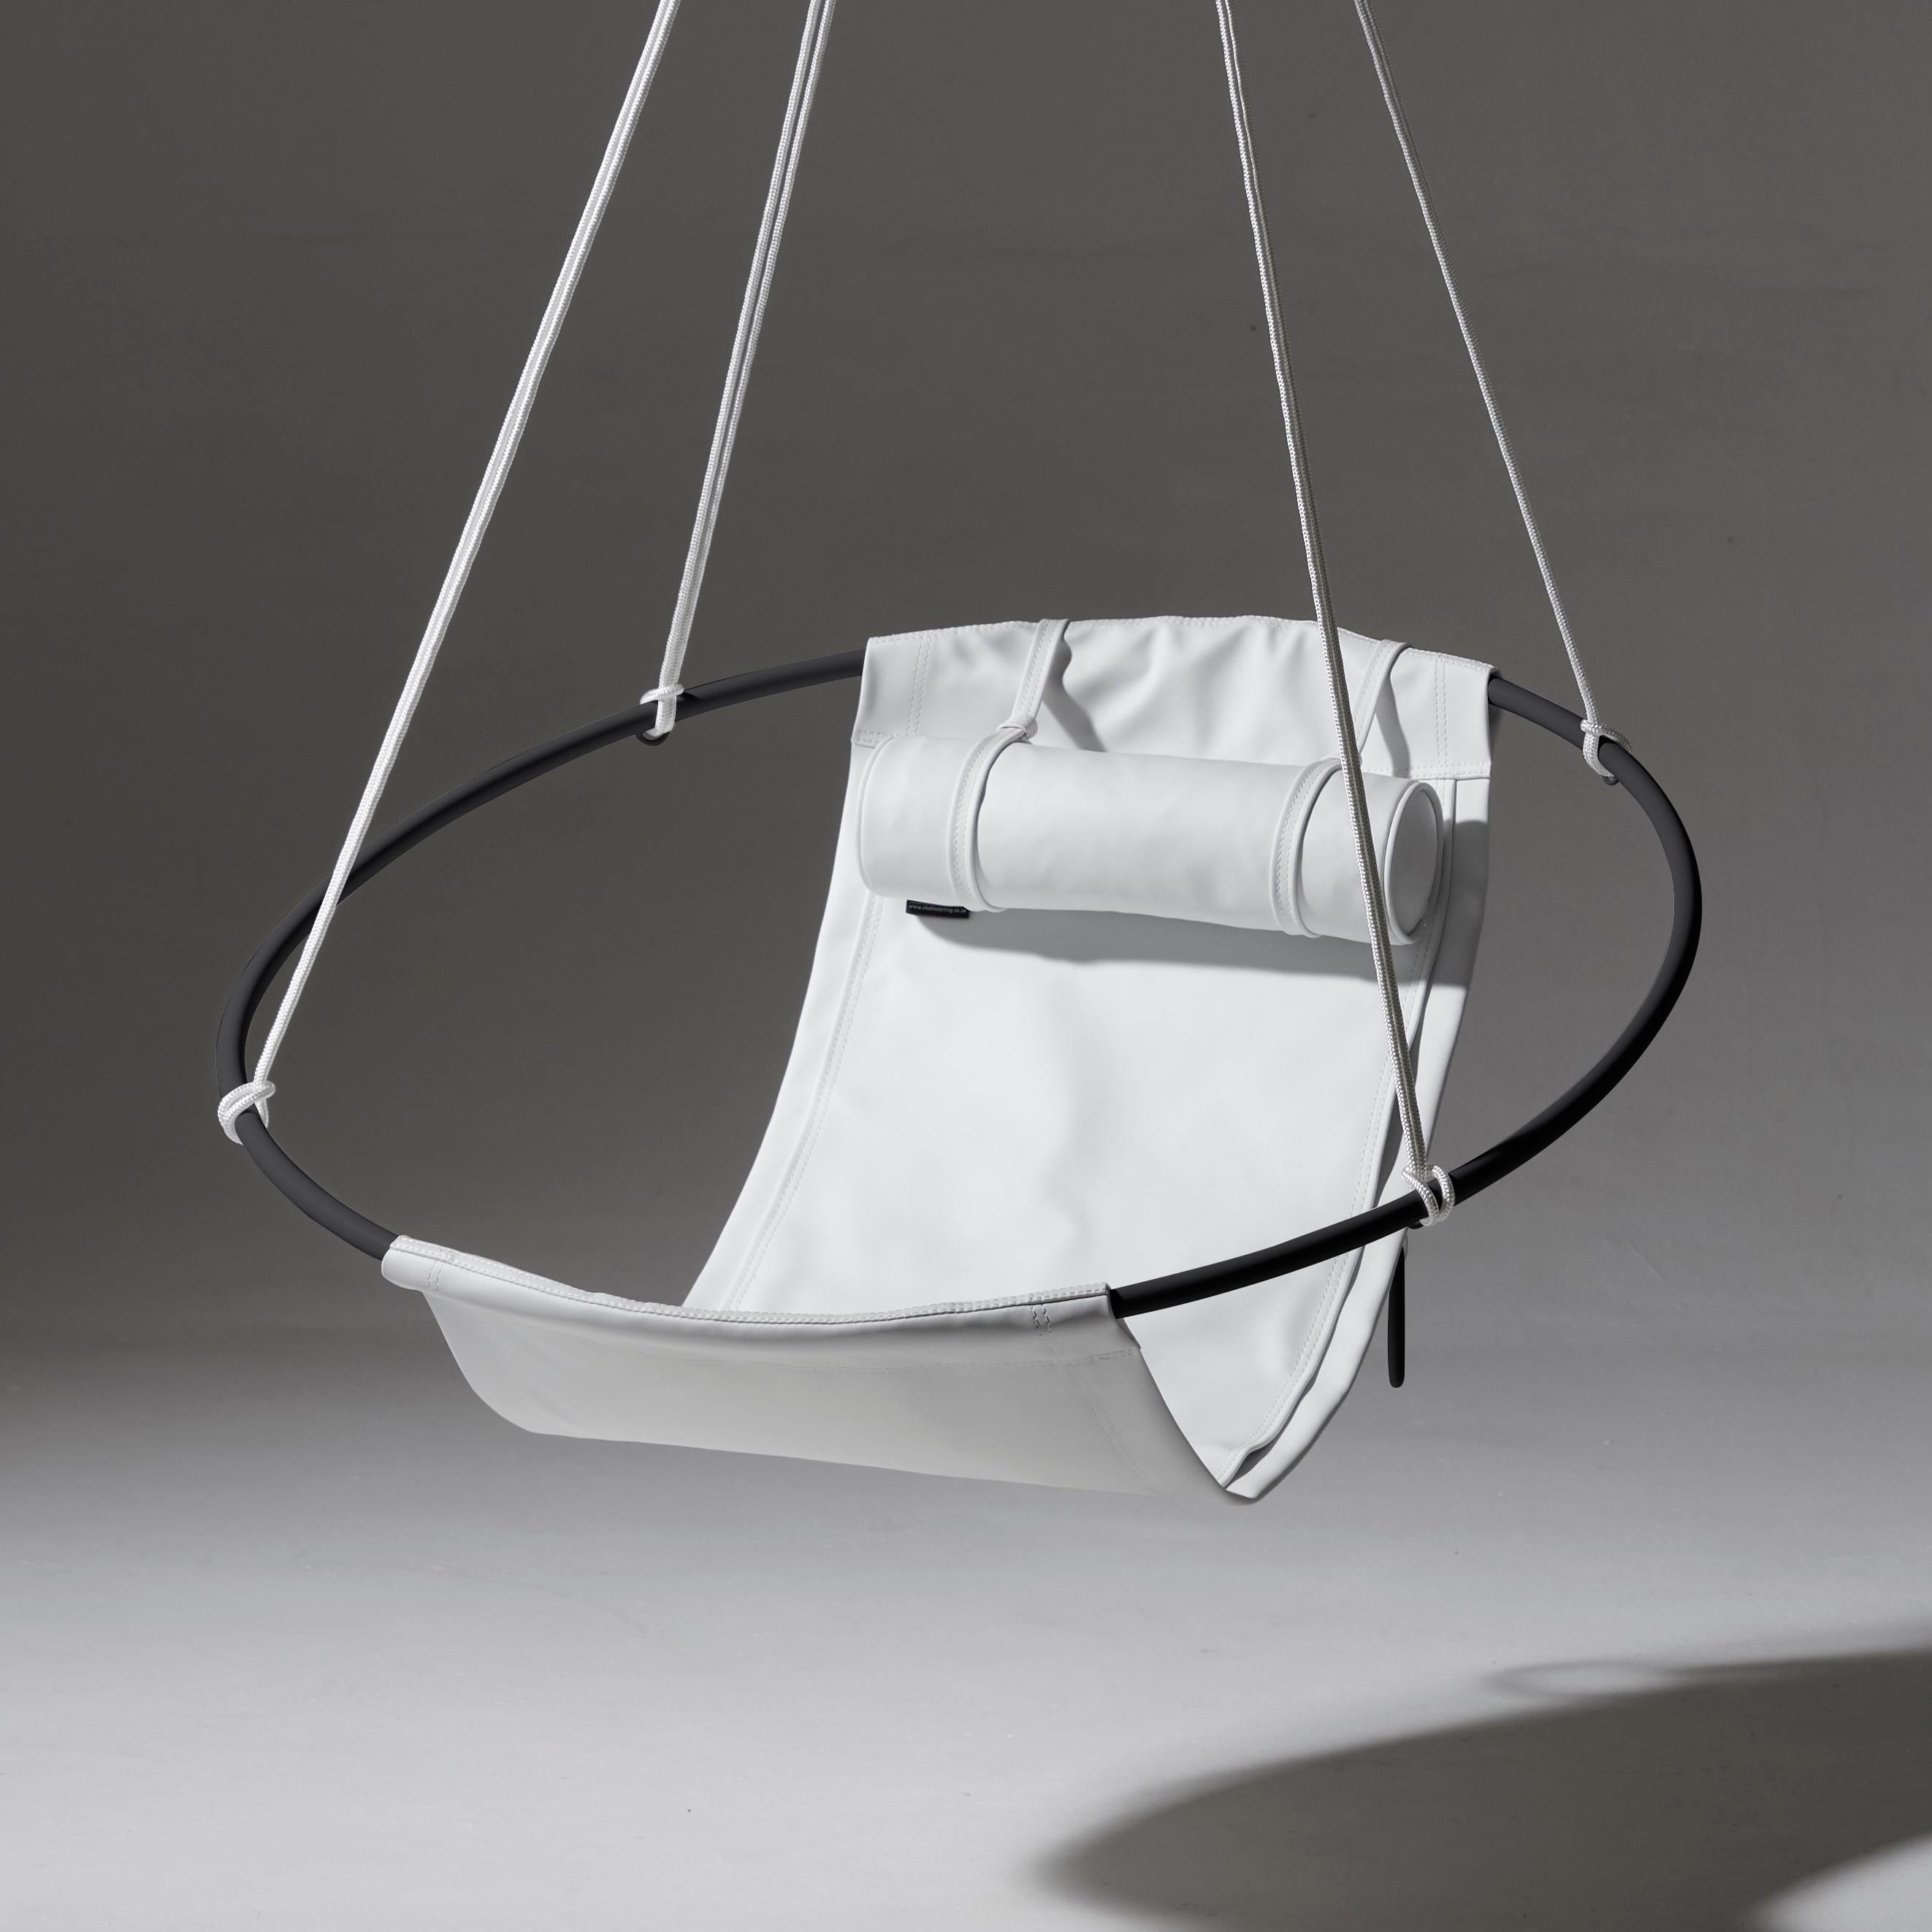 Our sling hanging chair which is crafted with Spradling Silvertex material – a highly-
sustainable environmentally-friendly vegan material.
The Slings can be ordered as a single but also works together as a pair, which is slightly
different from